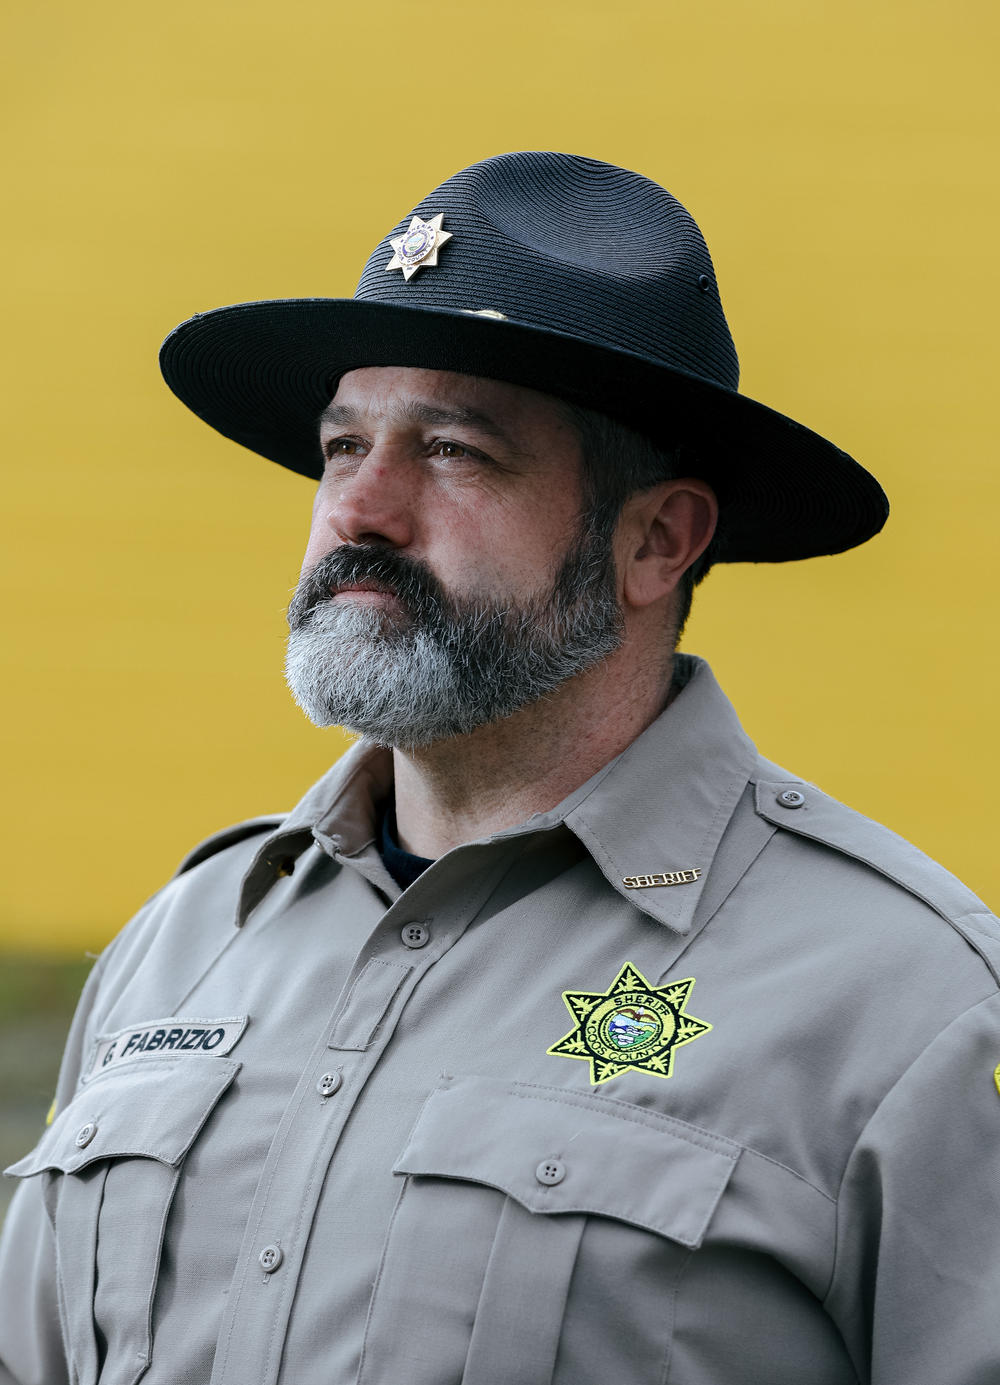 Coos County Sheriff Gabe Fabrizio says there were also complaints from voters who felt harassed or threatened when they turned in their votes at ballot boxes.